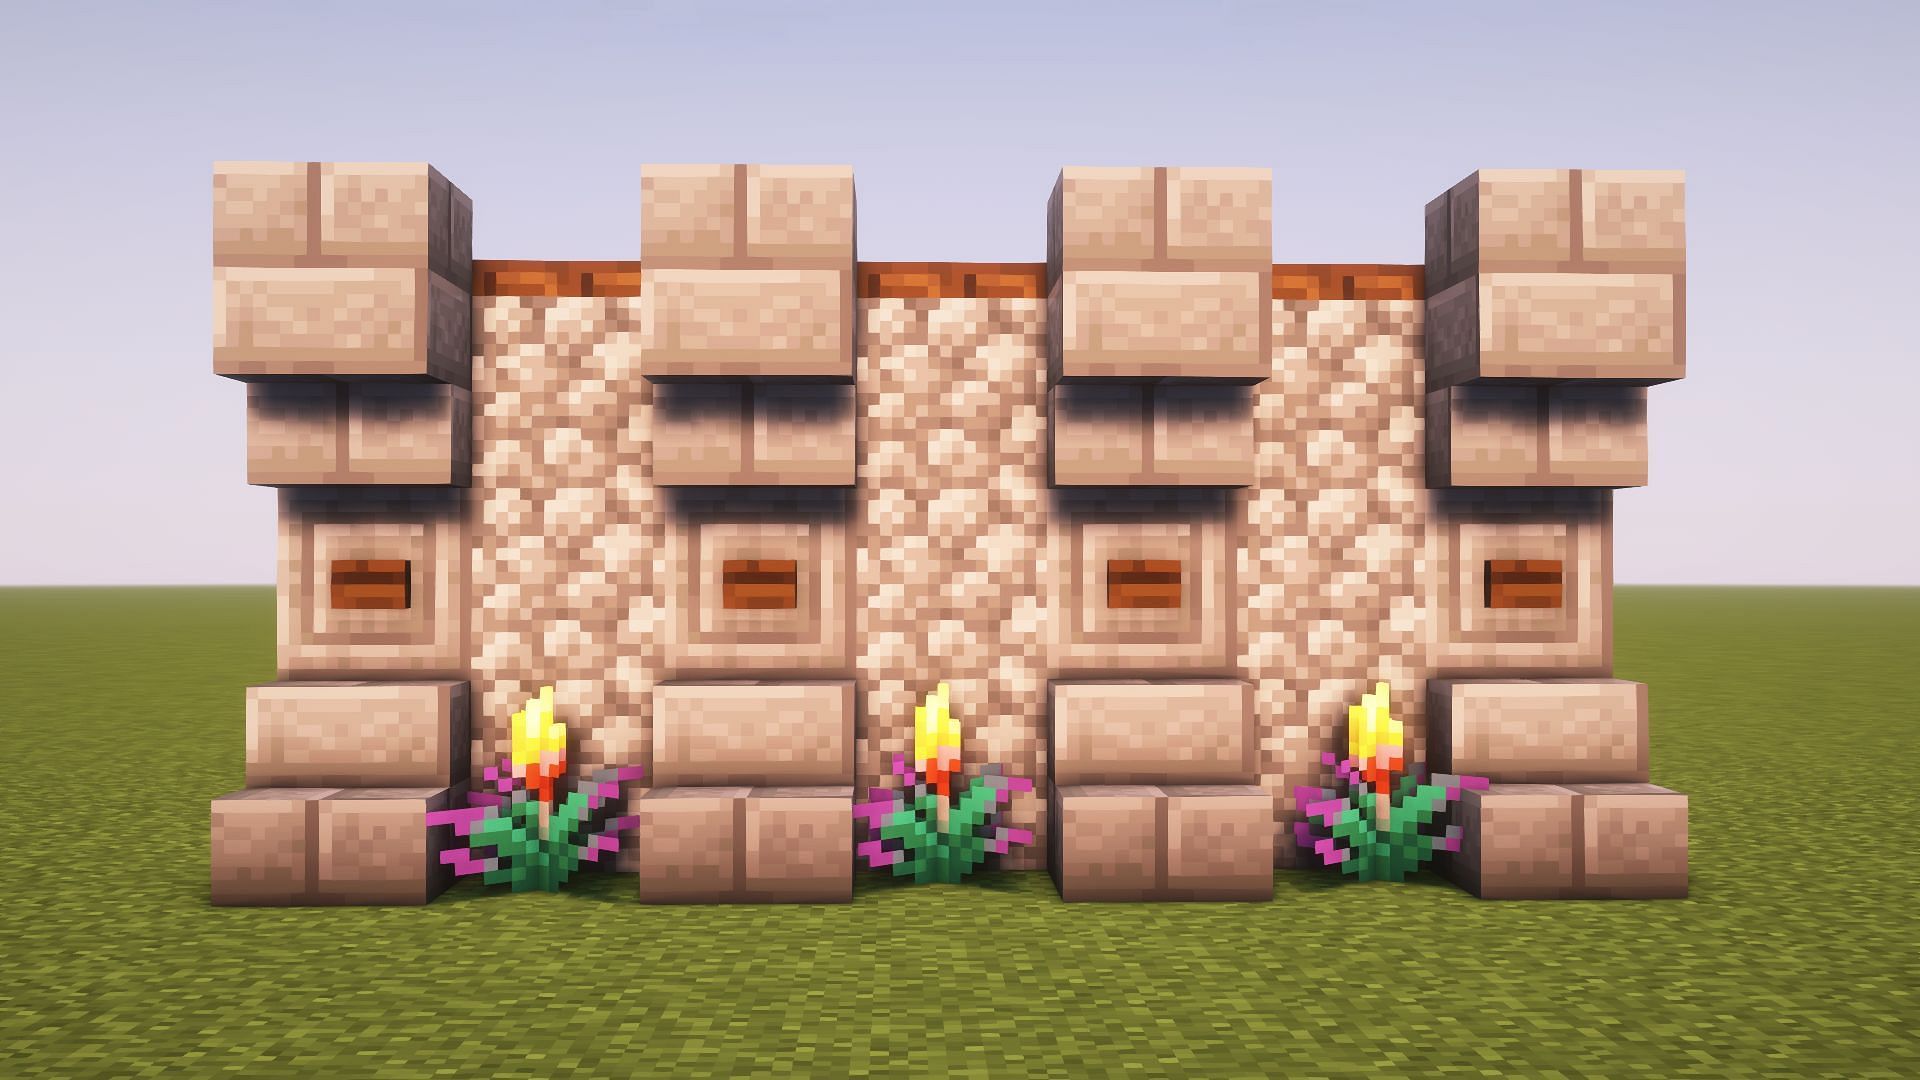 This wall is thick and made up of rigid blocks in Minecraft (Image via Mojang)